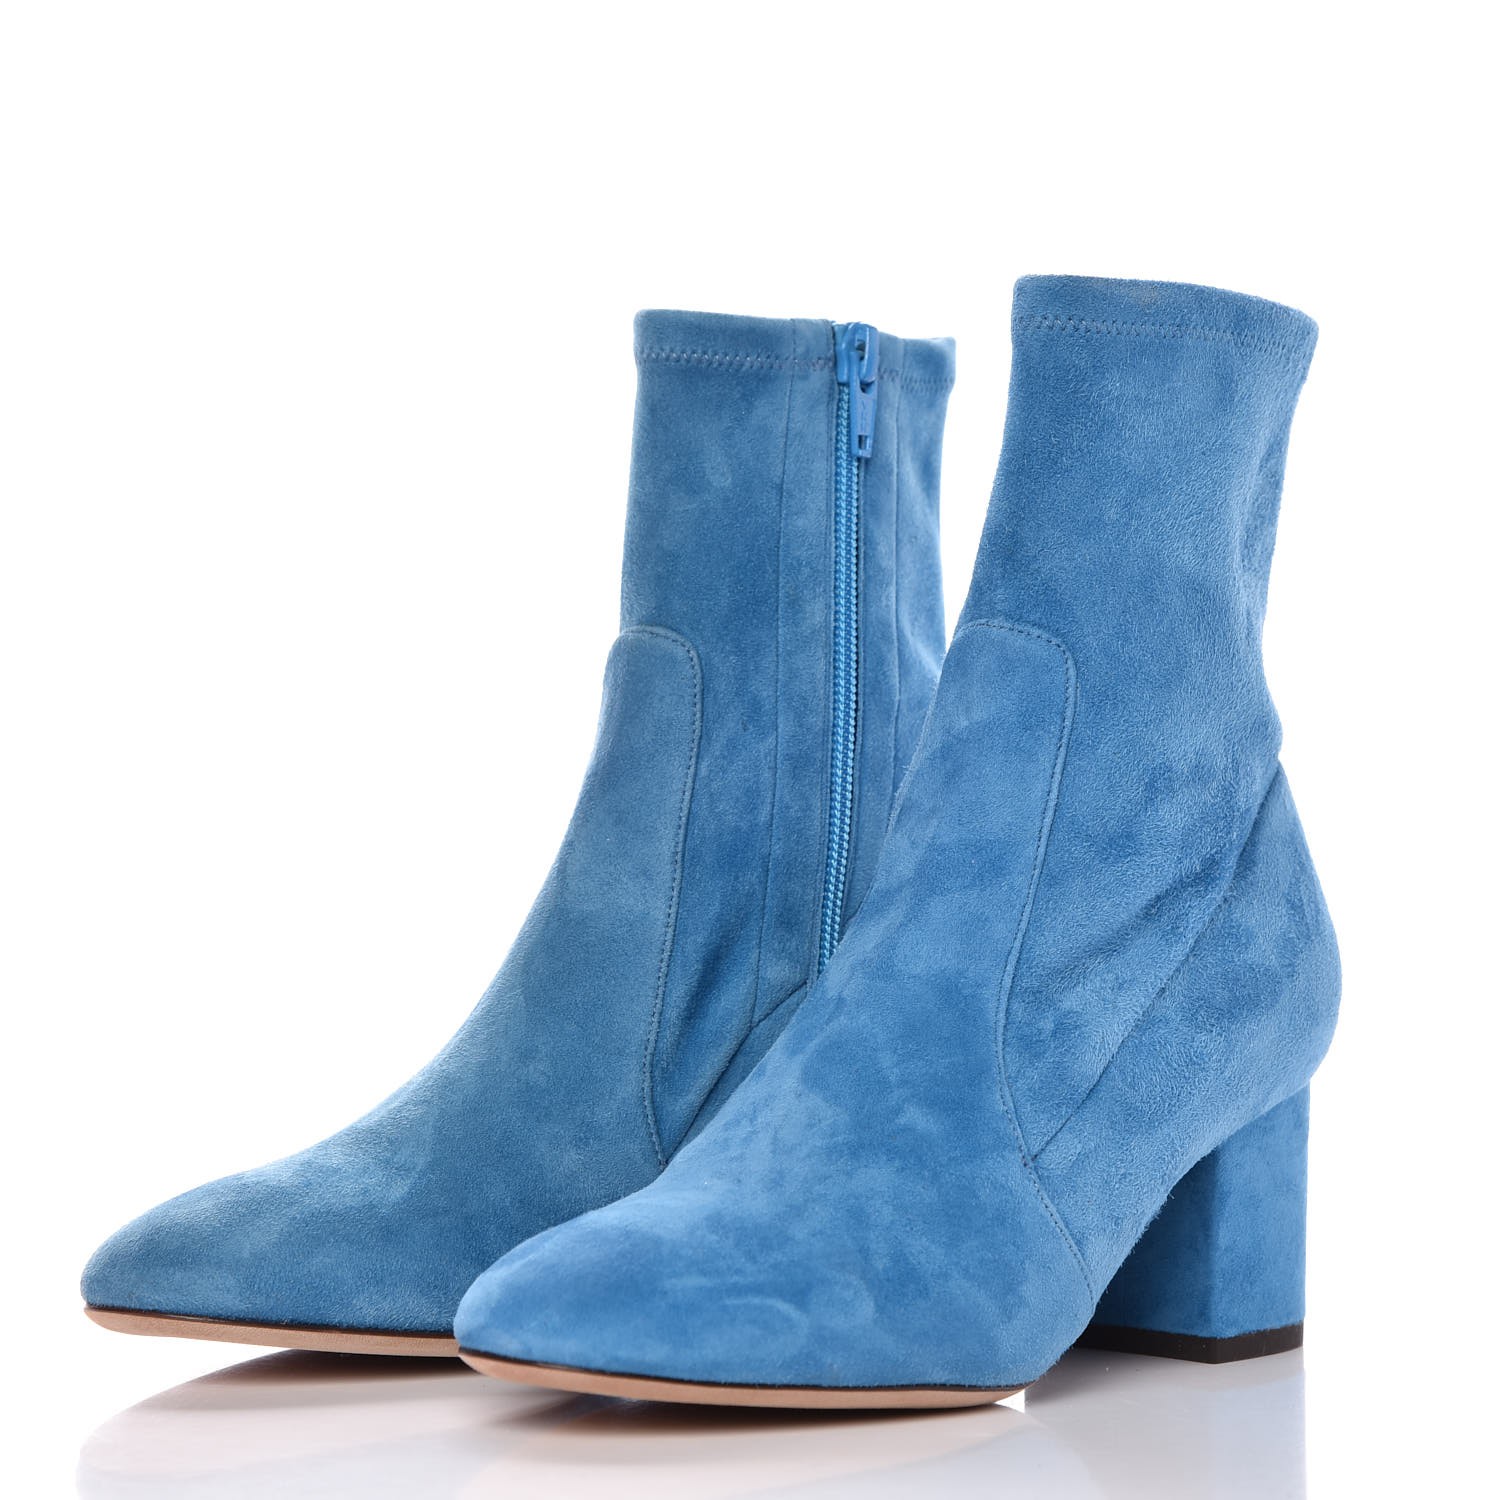 VALENTINO Suede Ankle Boots 36 Light Blue 302376